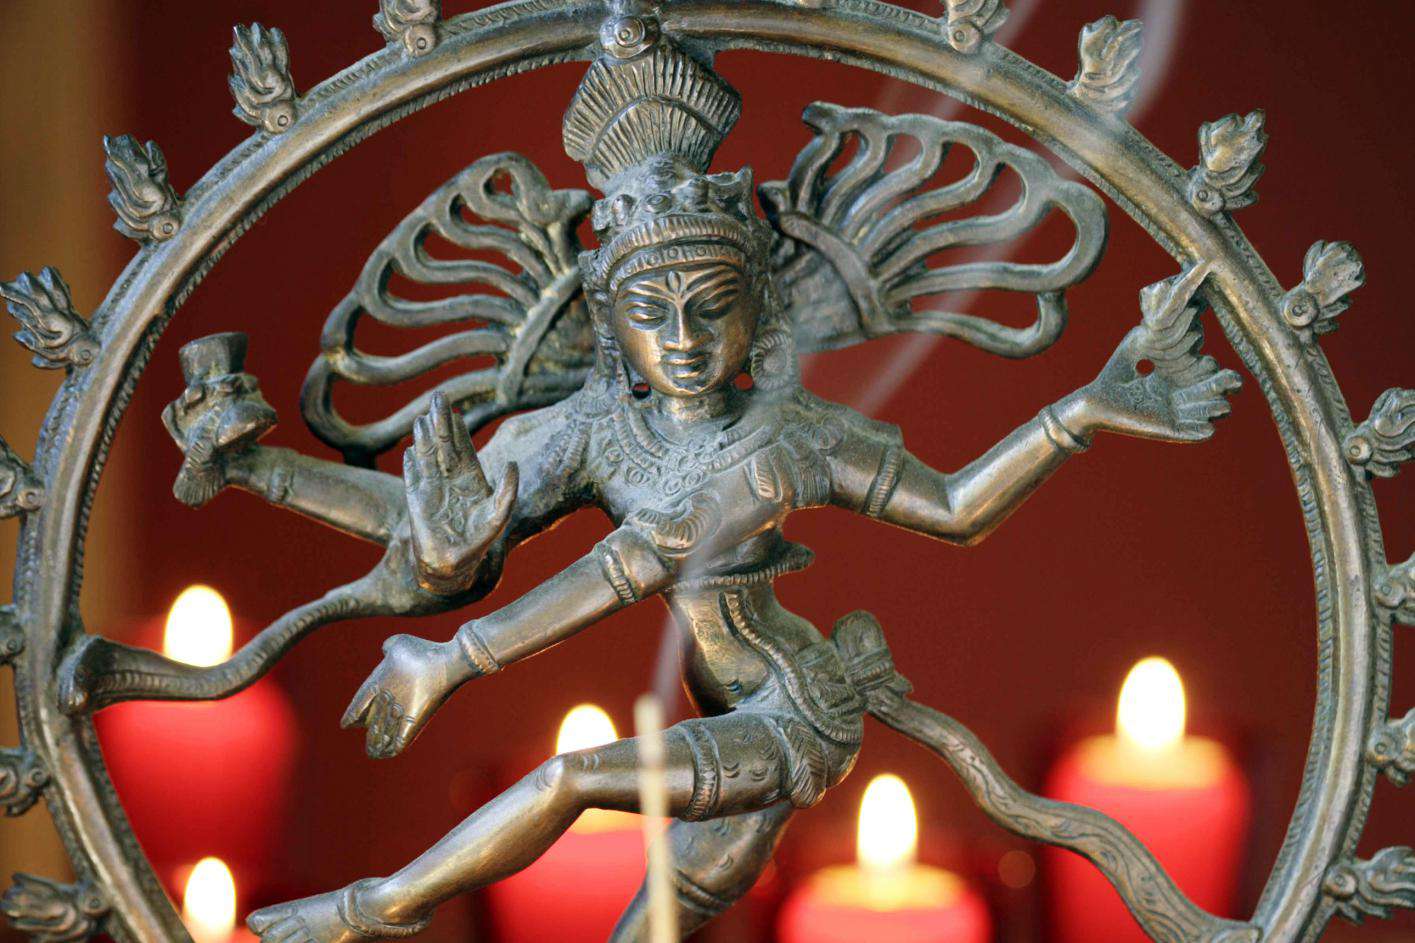 A statue of shiva with candles in the background.